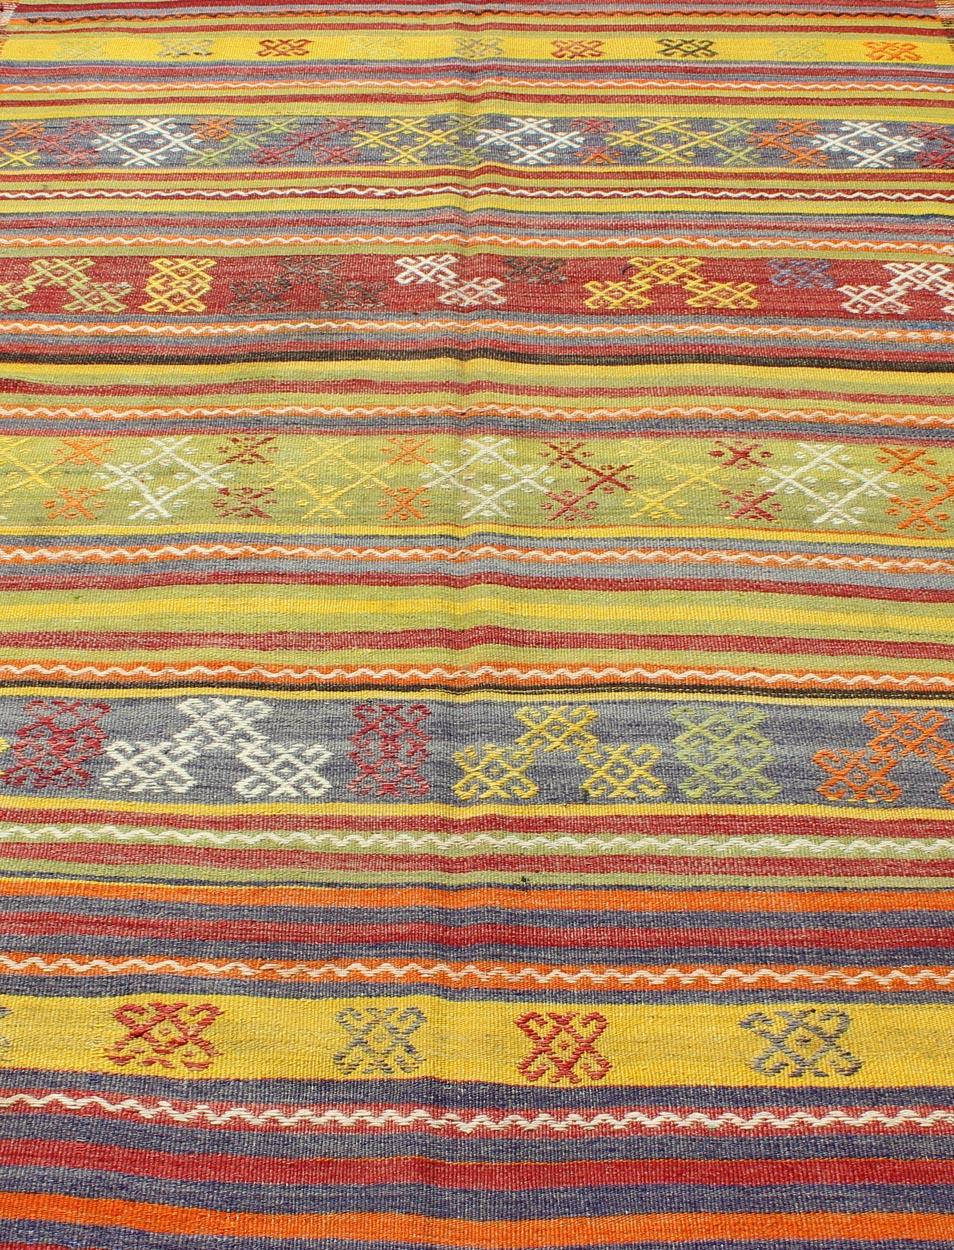 Vintage Turkish Kilim Rug with Geometric Shapes and Colorful Horizontal Stripes For Sale 4